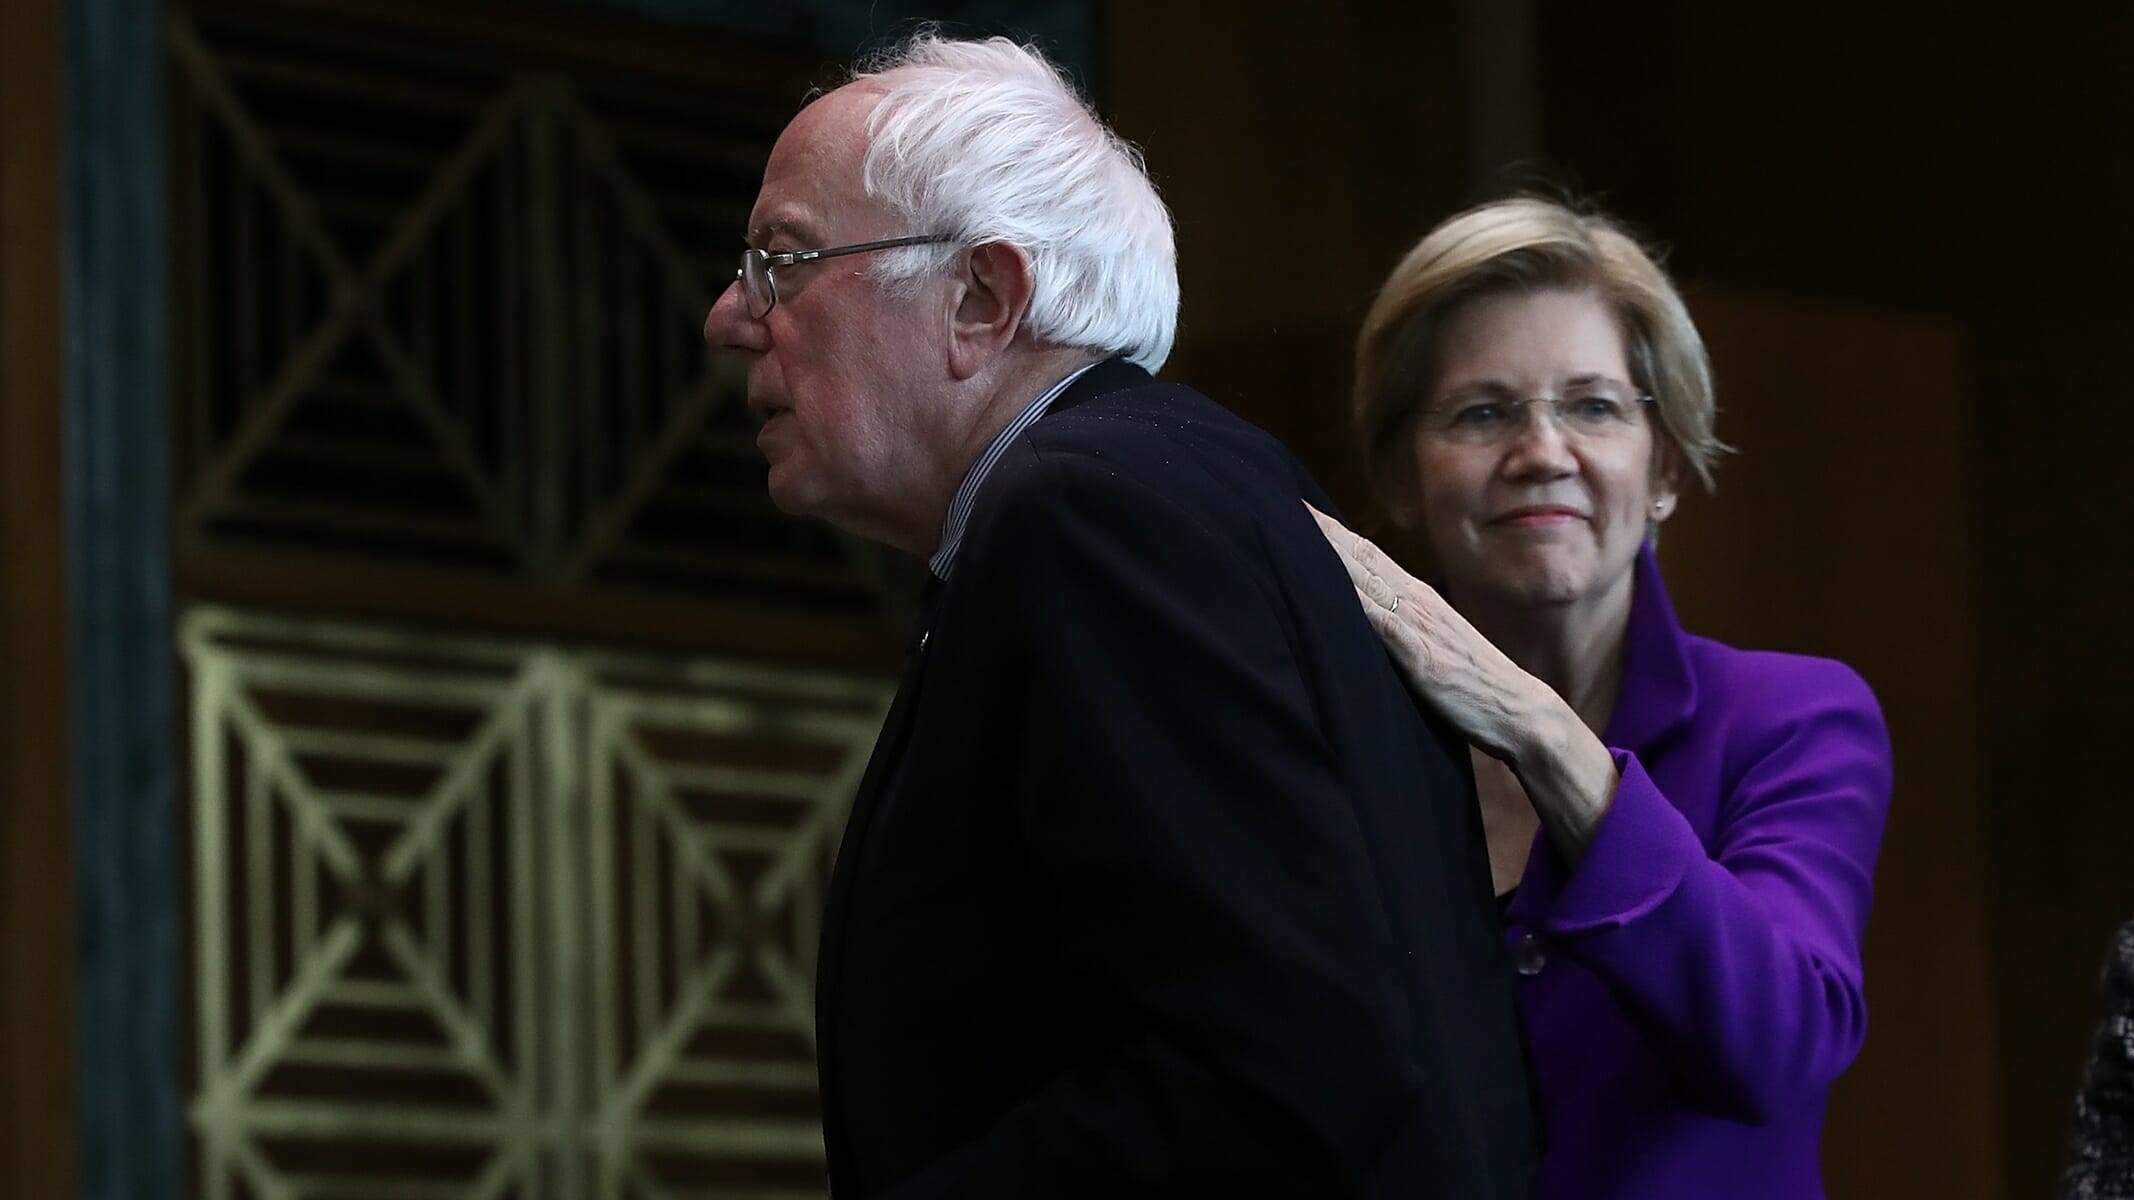 That Poll About 26% of Bernie Voters Preferring Trump to Warren Lacks Crucial Context